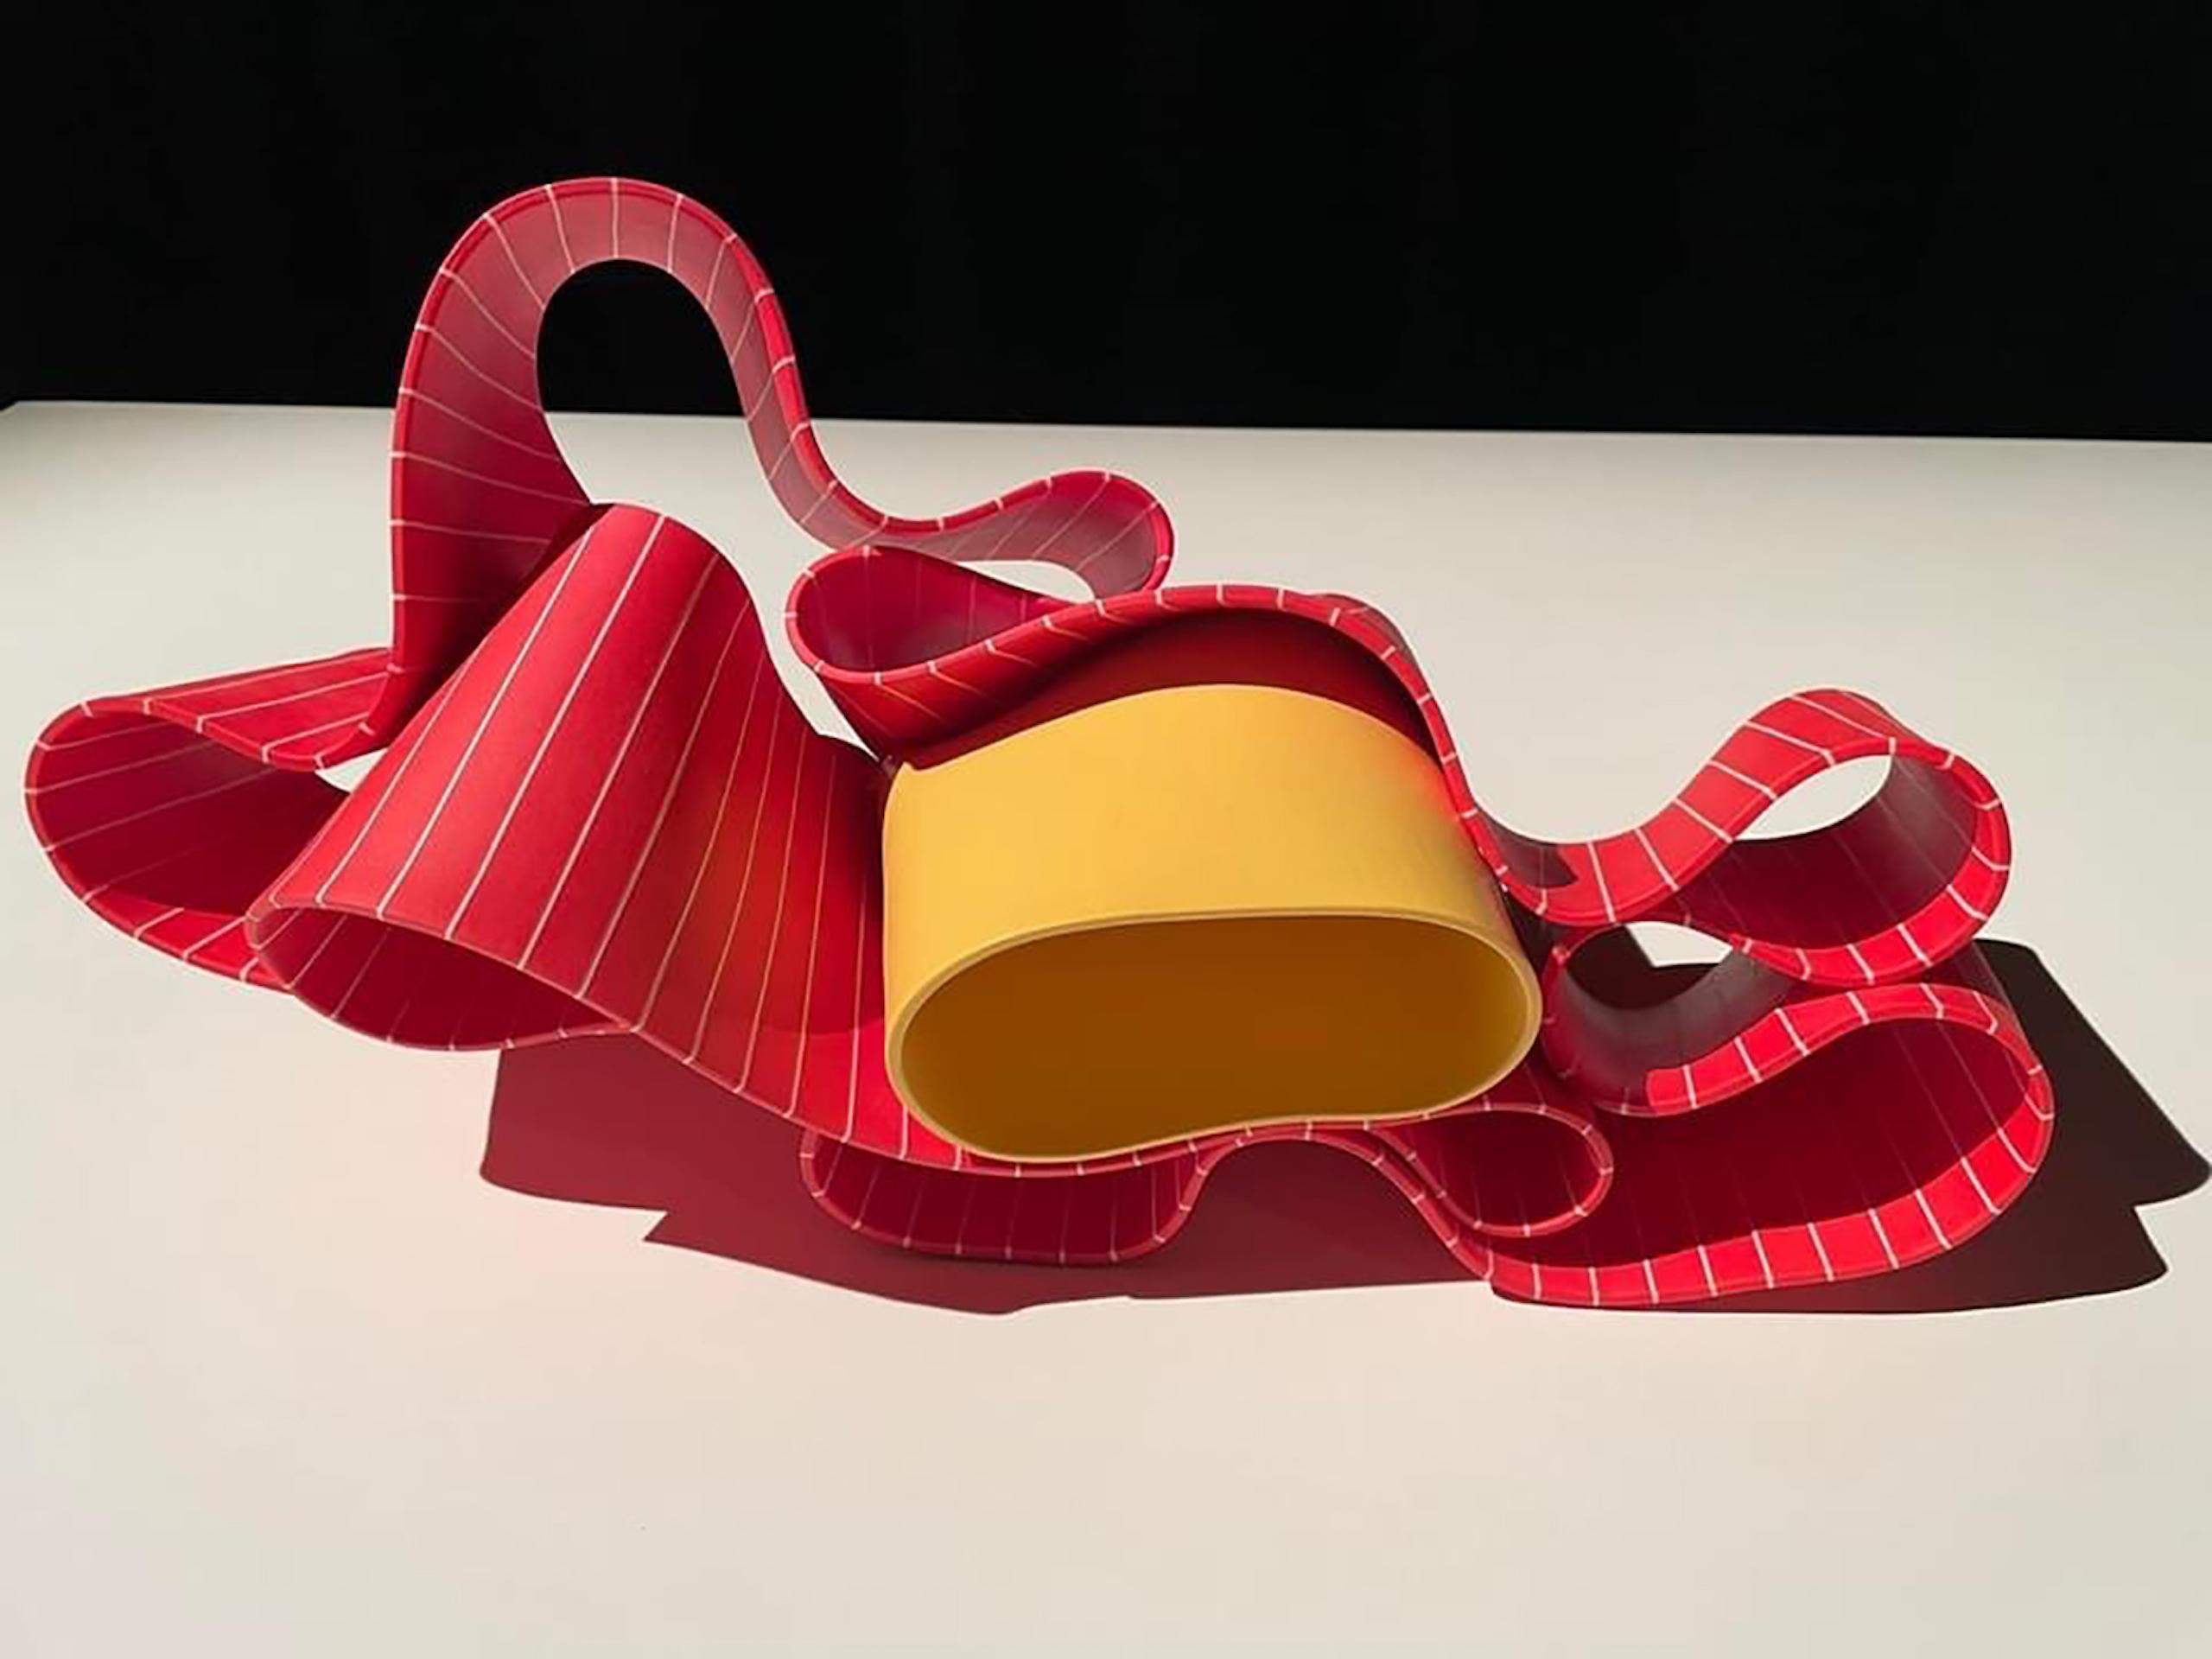 Folding in Motion 1 by Simcha Even-Chen - porcelain sculpture, red and yellow For Sale 5